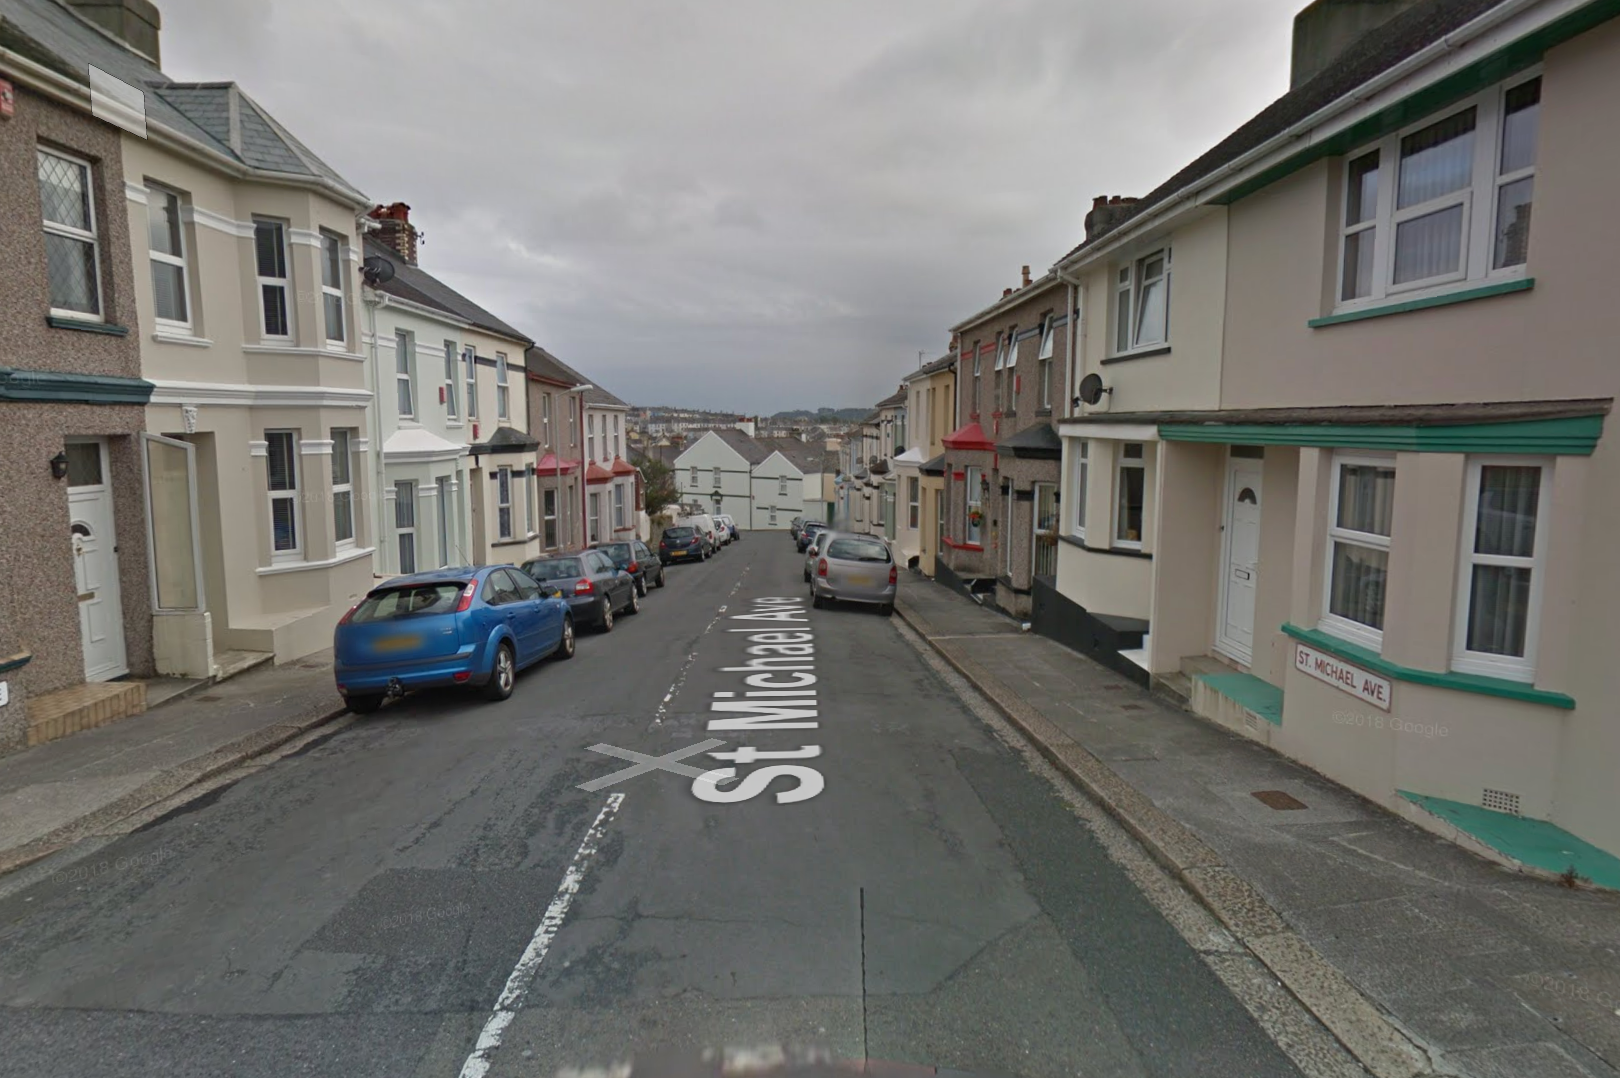 major incident declared in plymouth after suspected ww2 bomb found in back garden